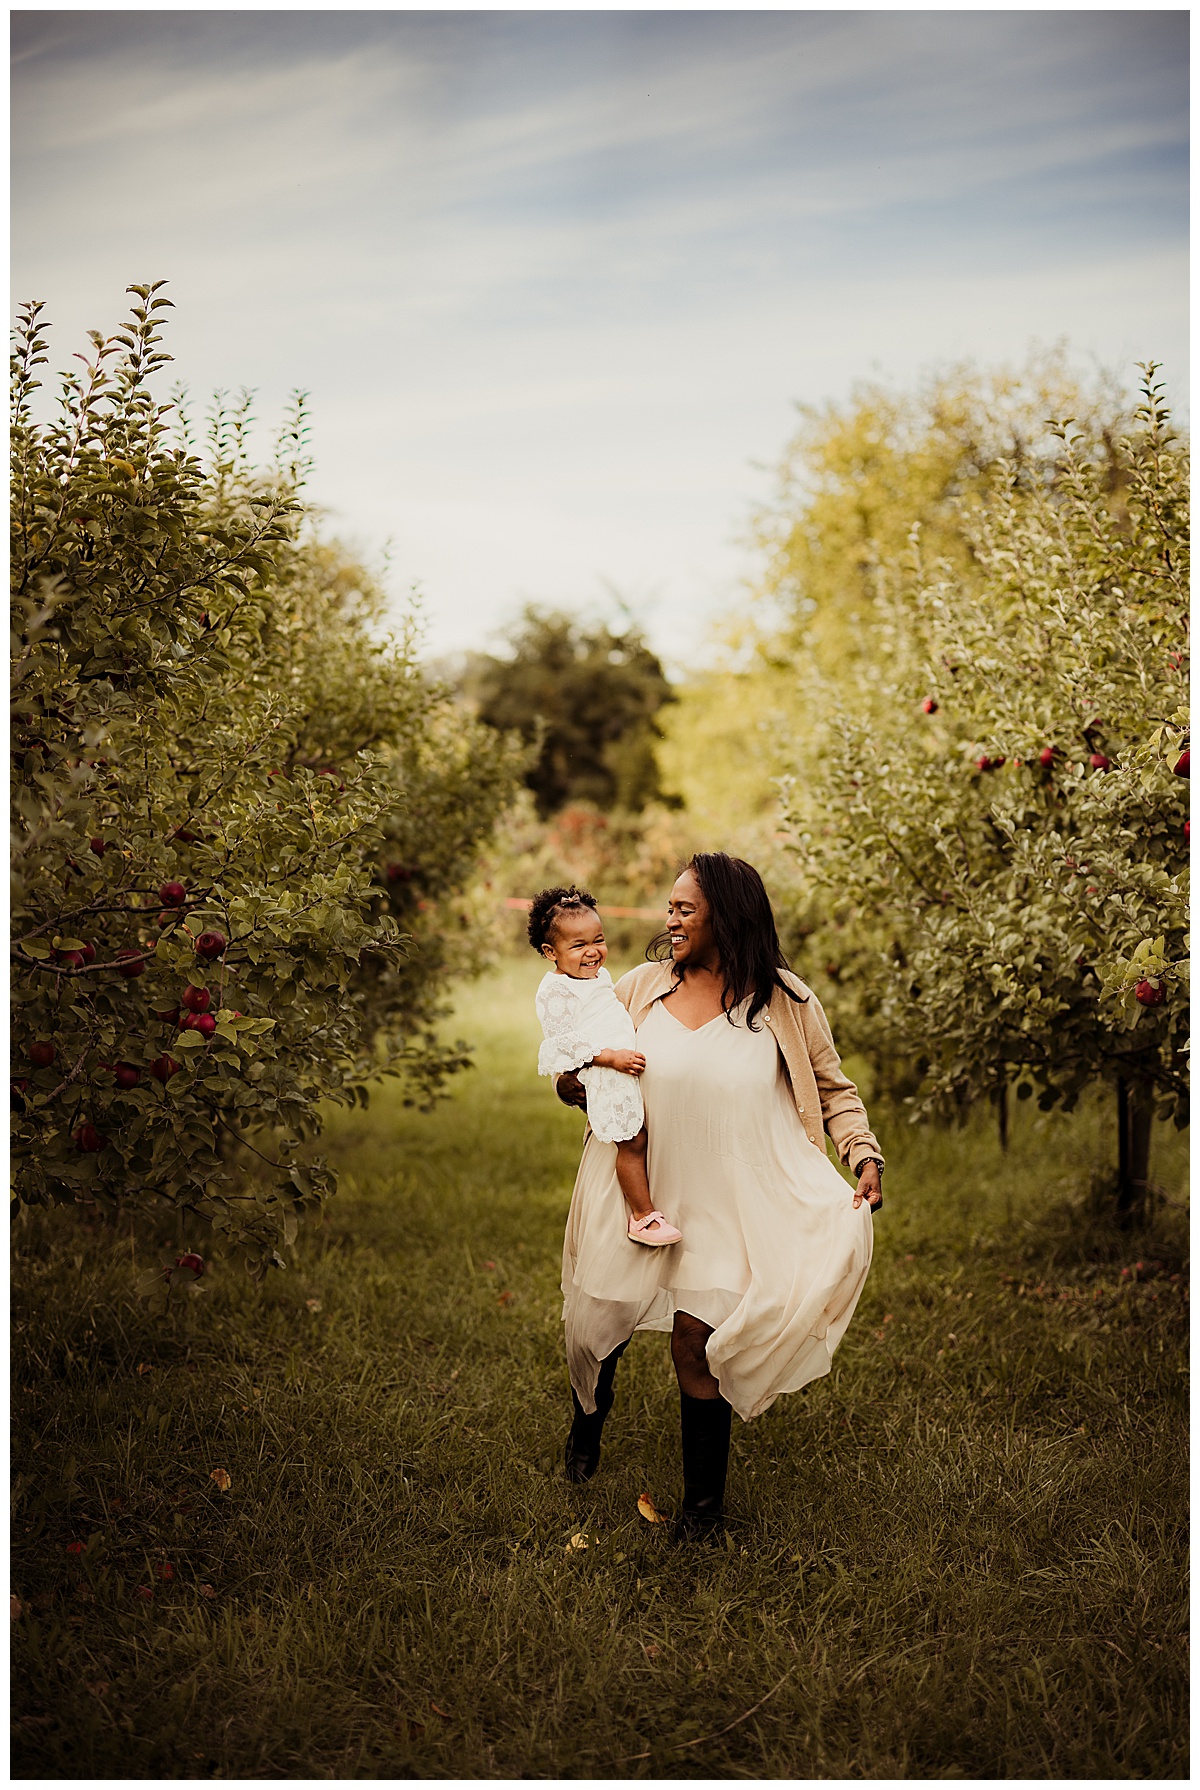 Mom and daughter walk together for Norma Fayak Photography